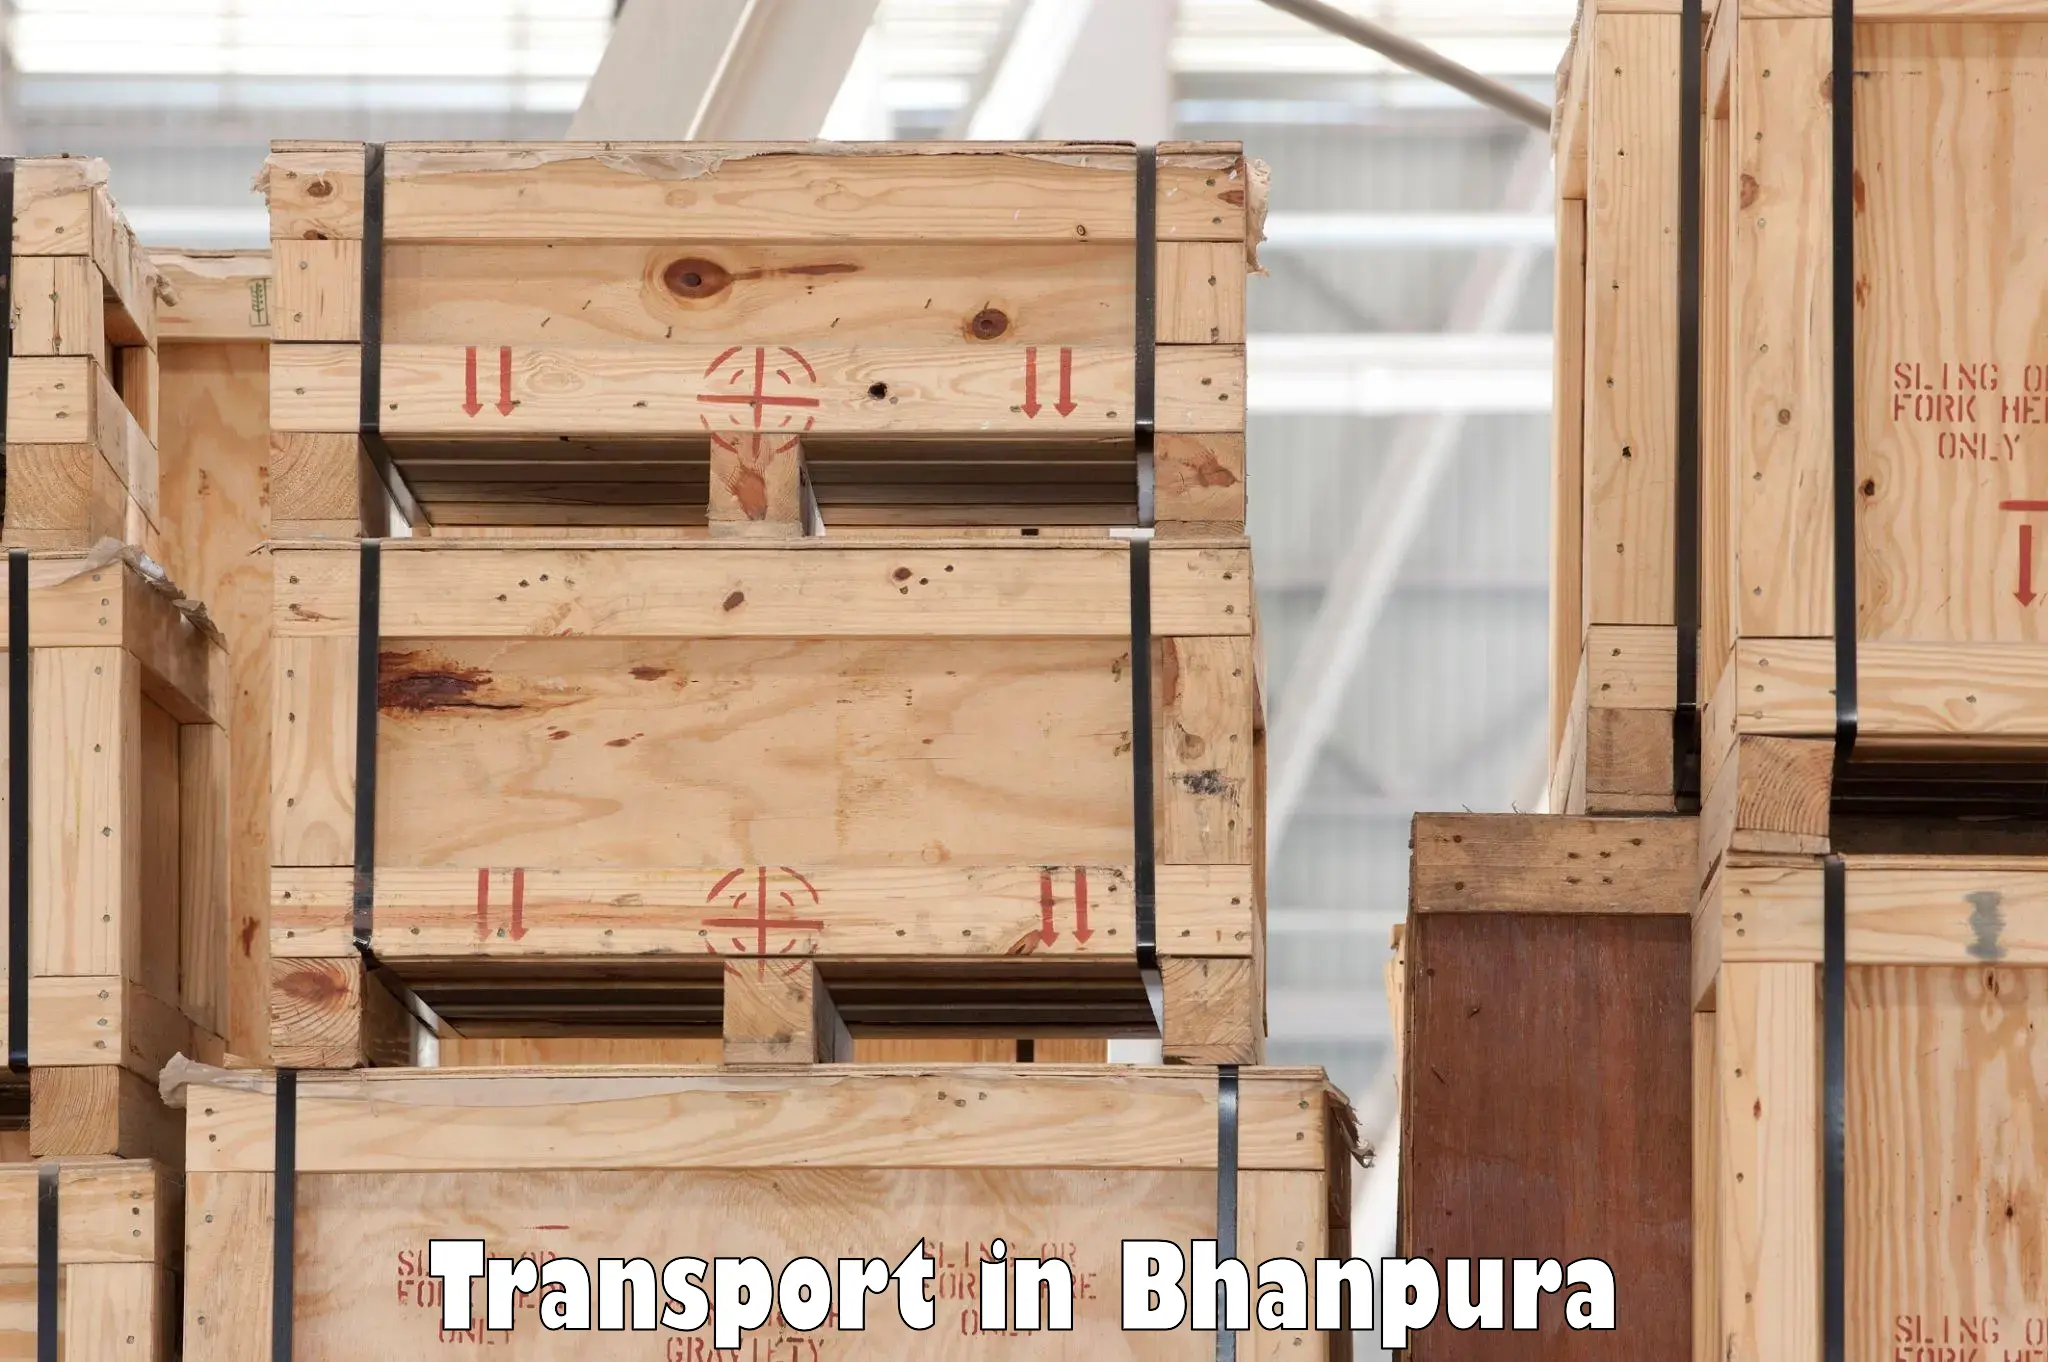 Parcel transport services in Bhanpura